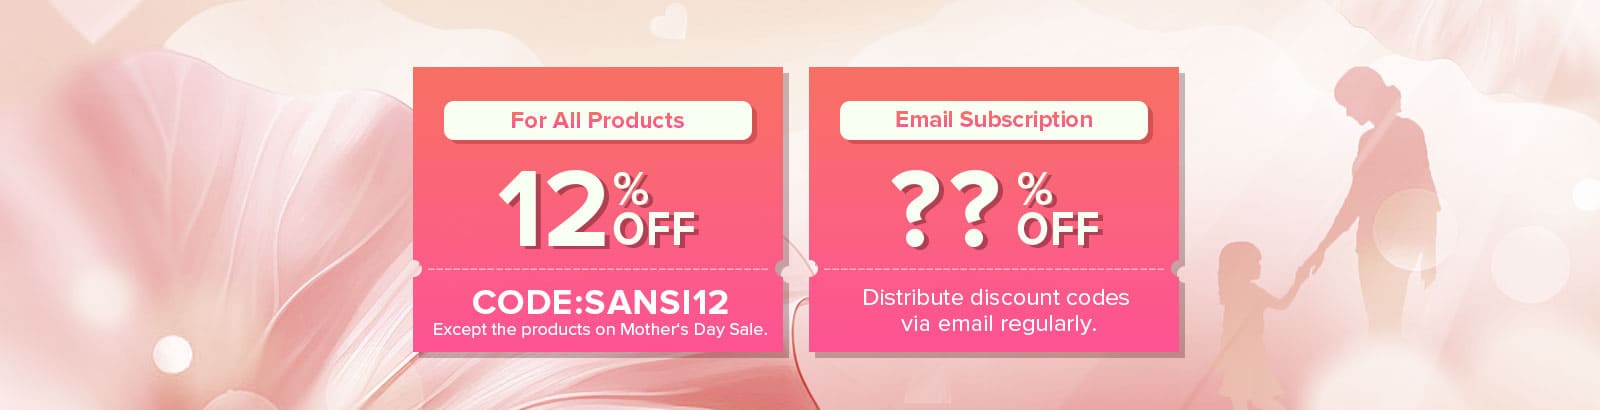 For All Products 12% off With Code:SANSI12,Email Subscription to get extra discount code.